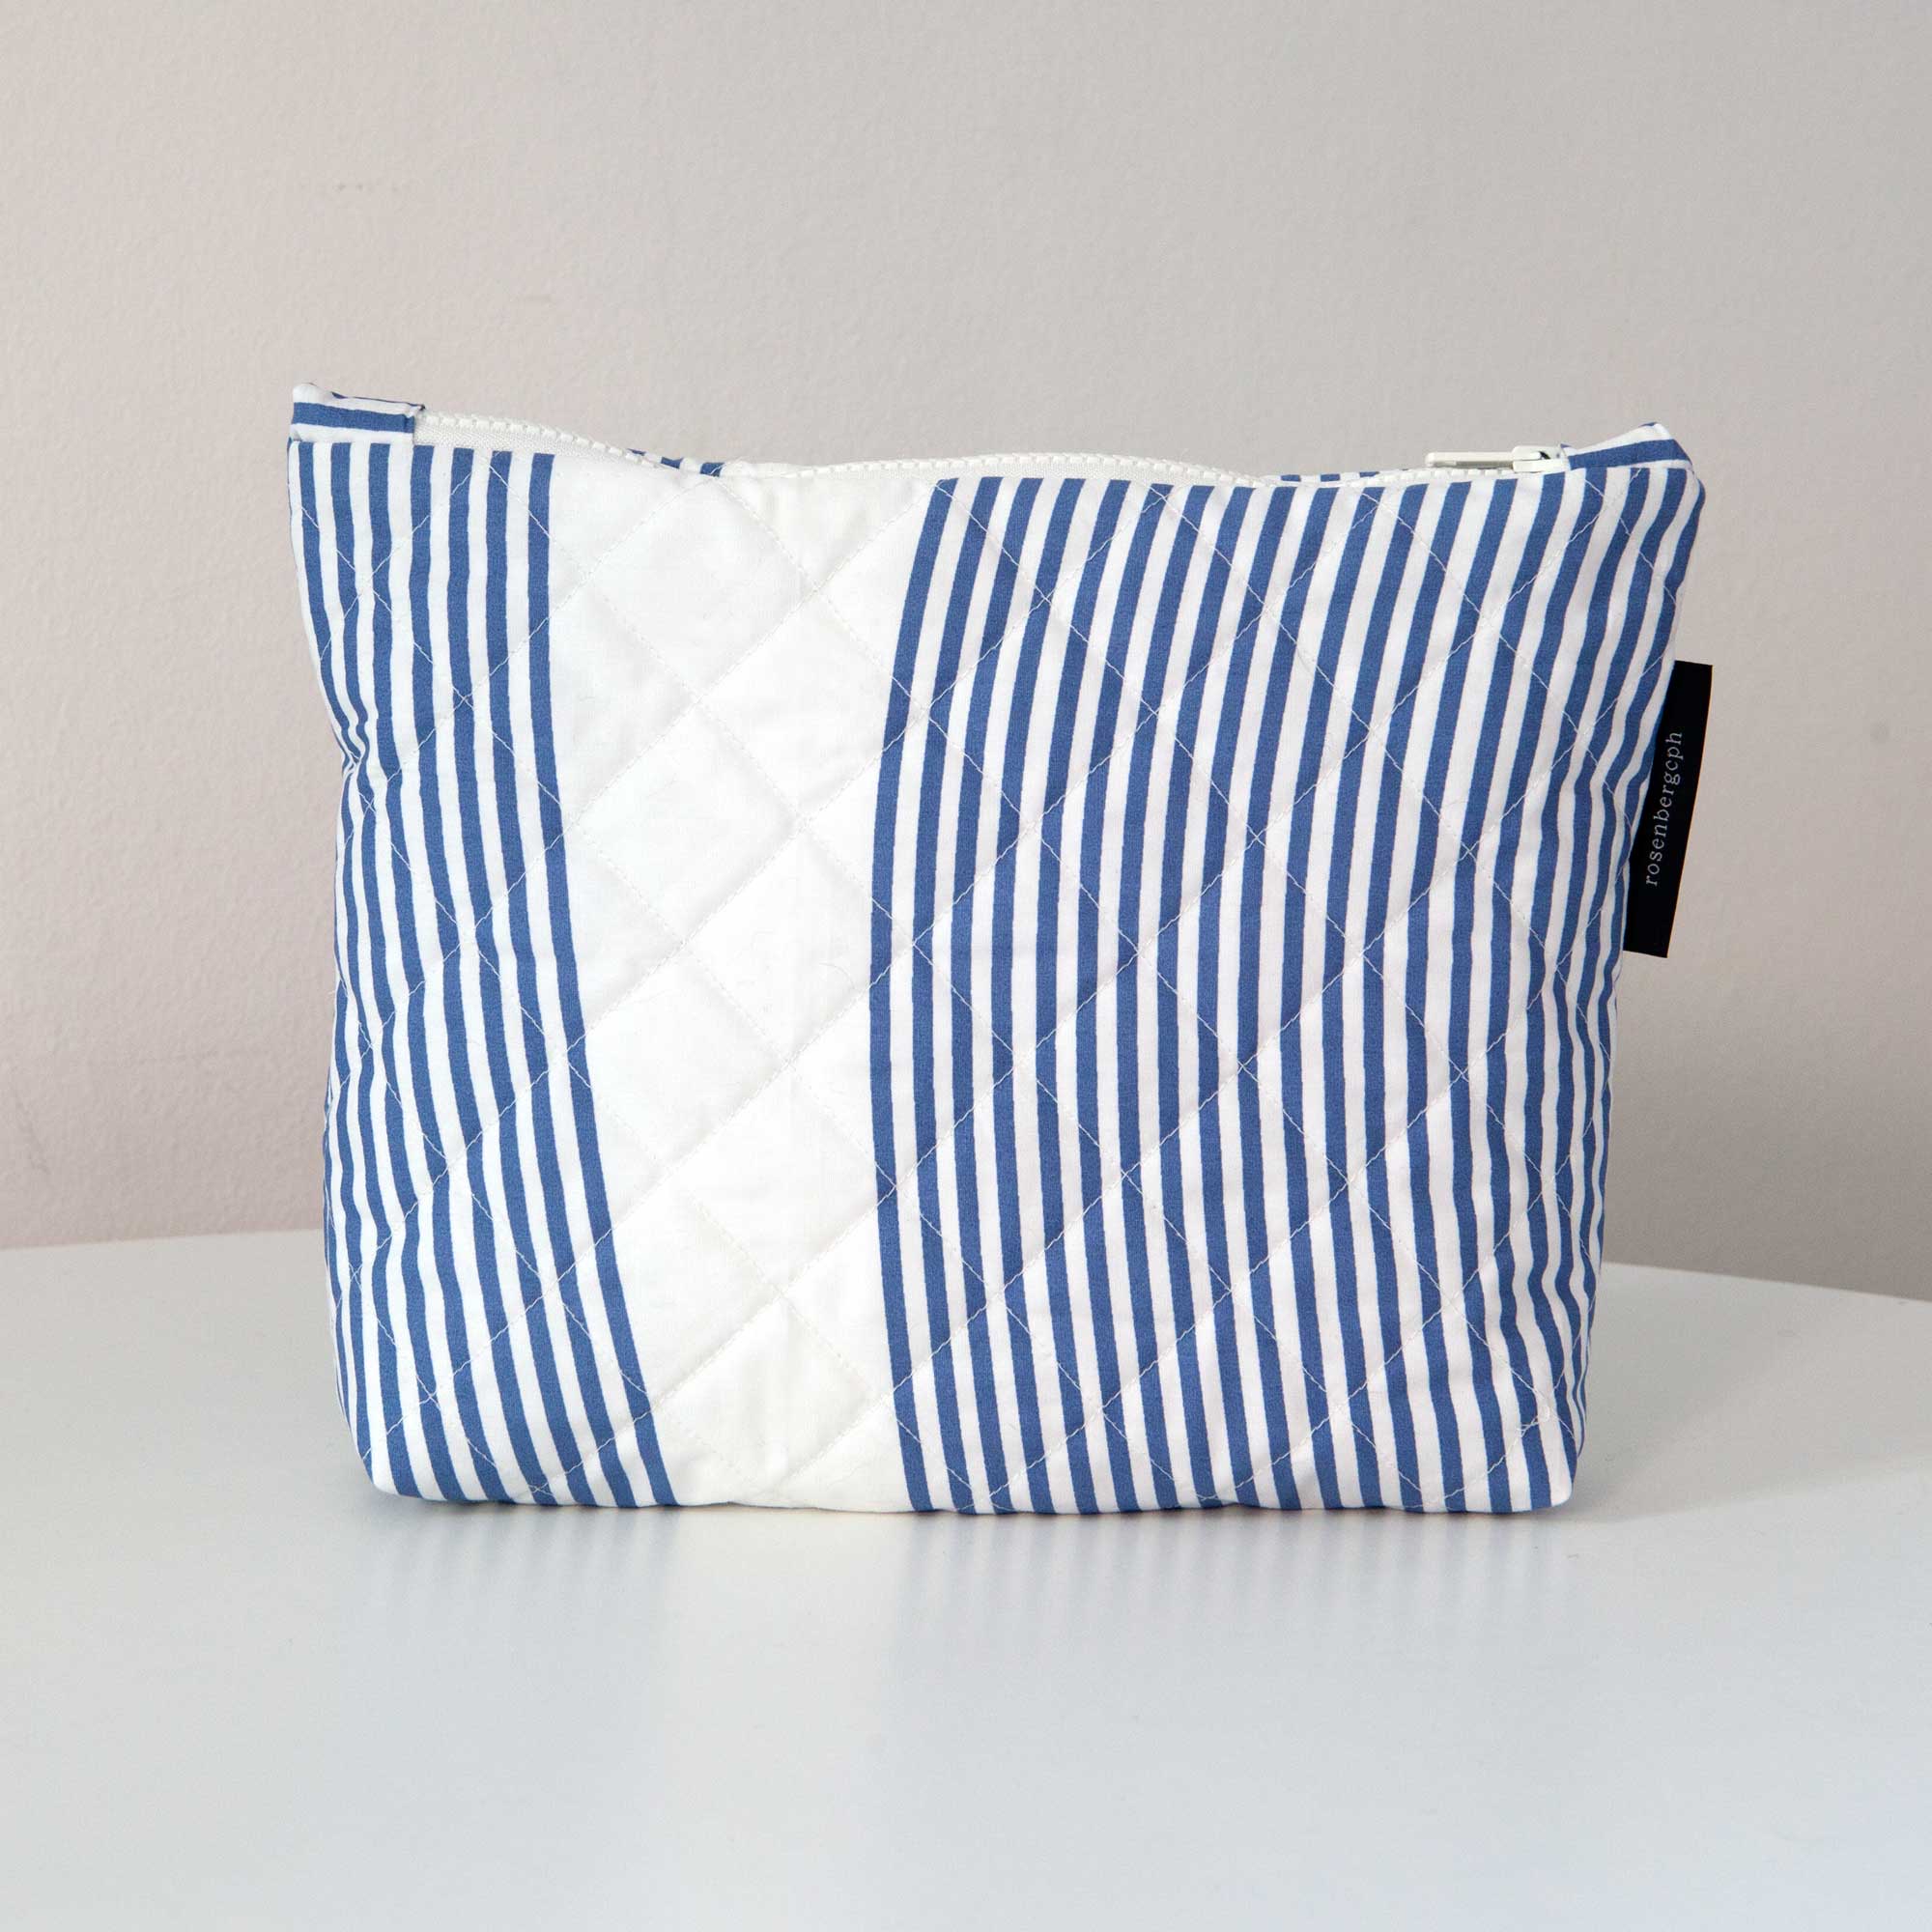 River blue, quilted purse, limited edition, design by Anne Rosenberg, RosenbergCph